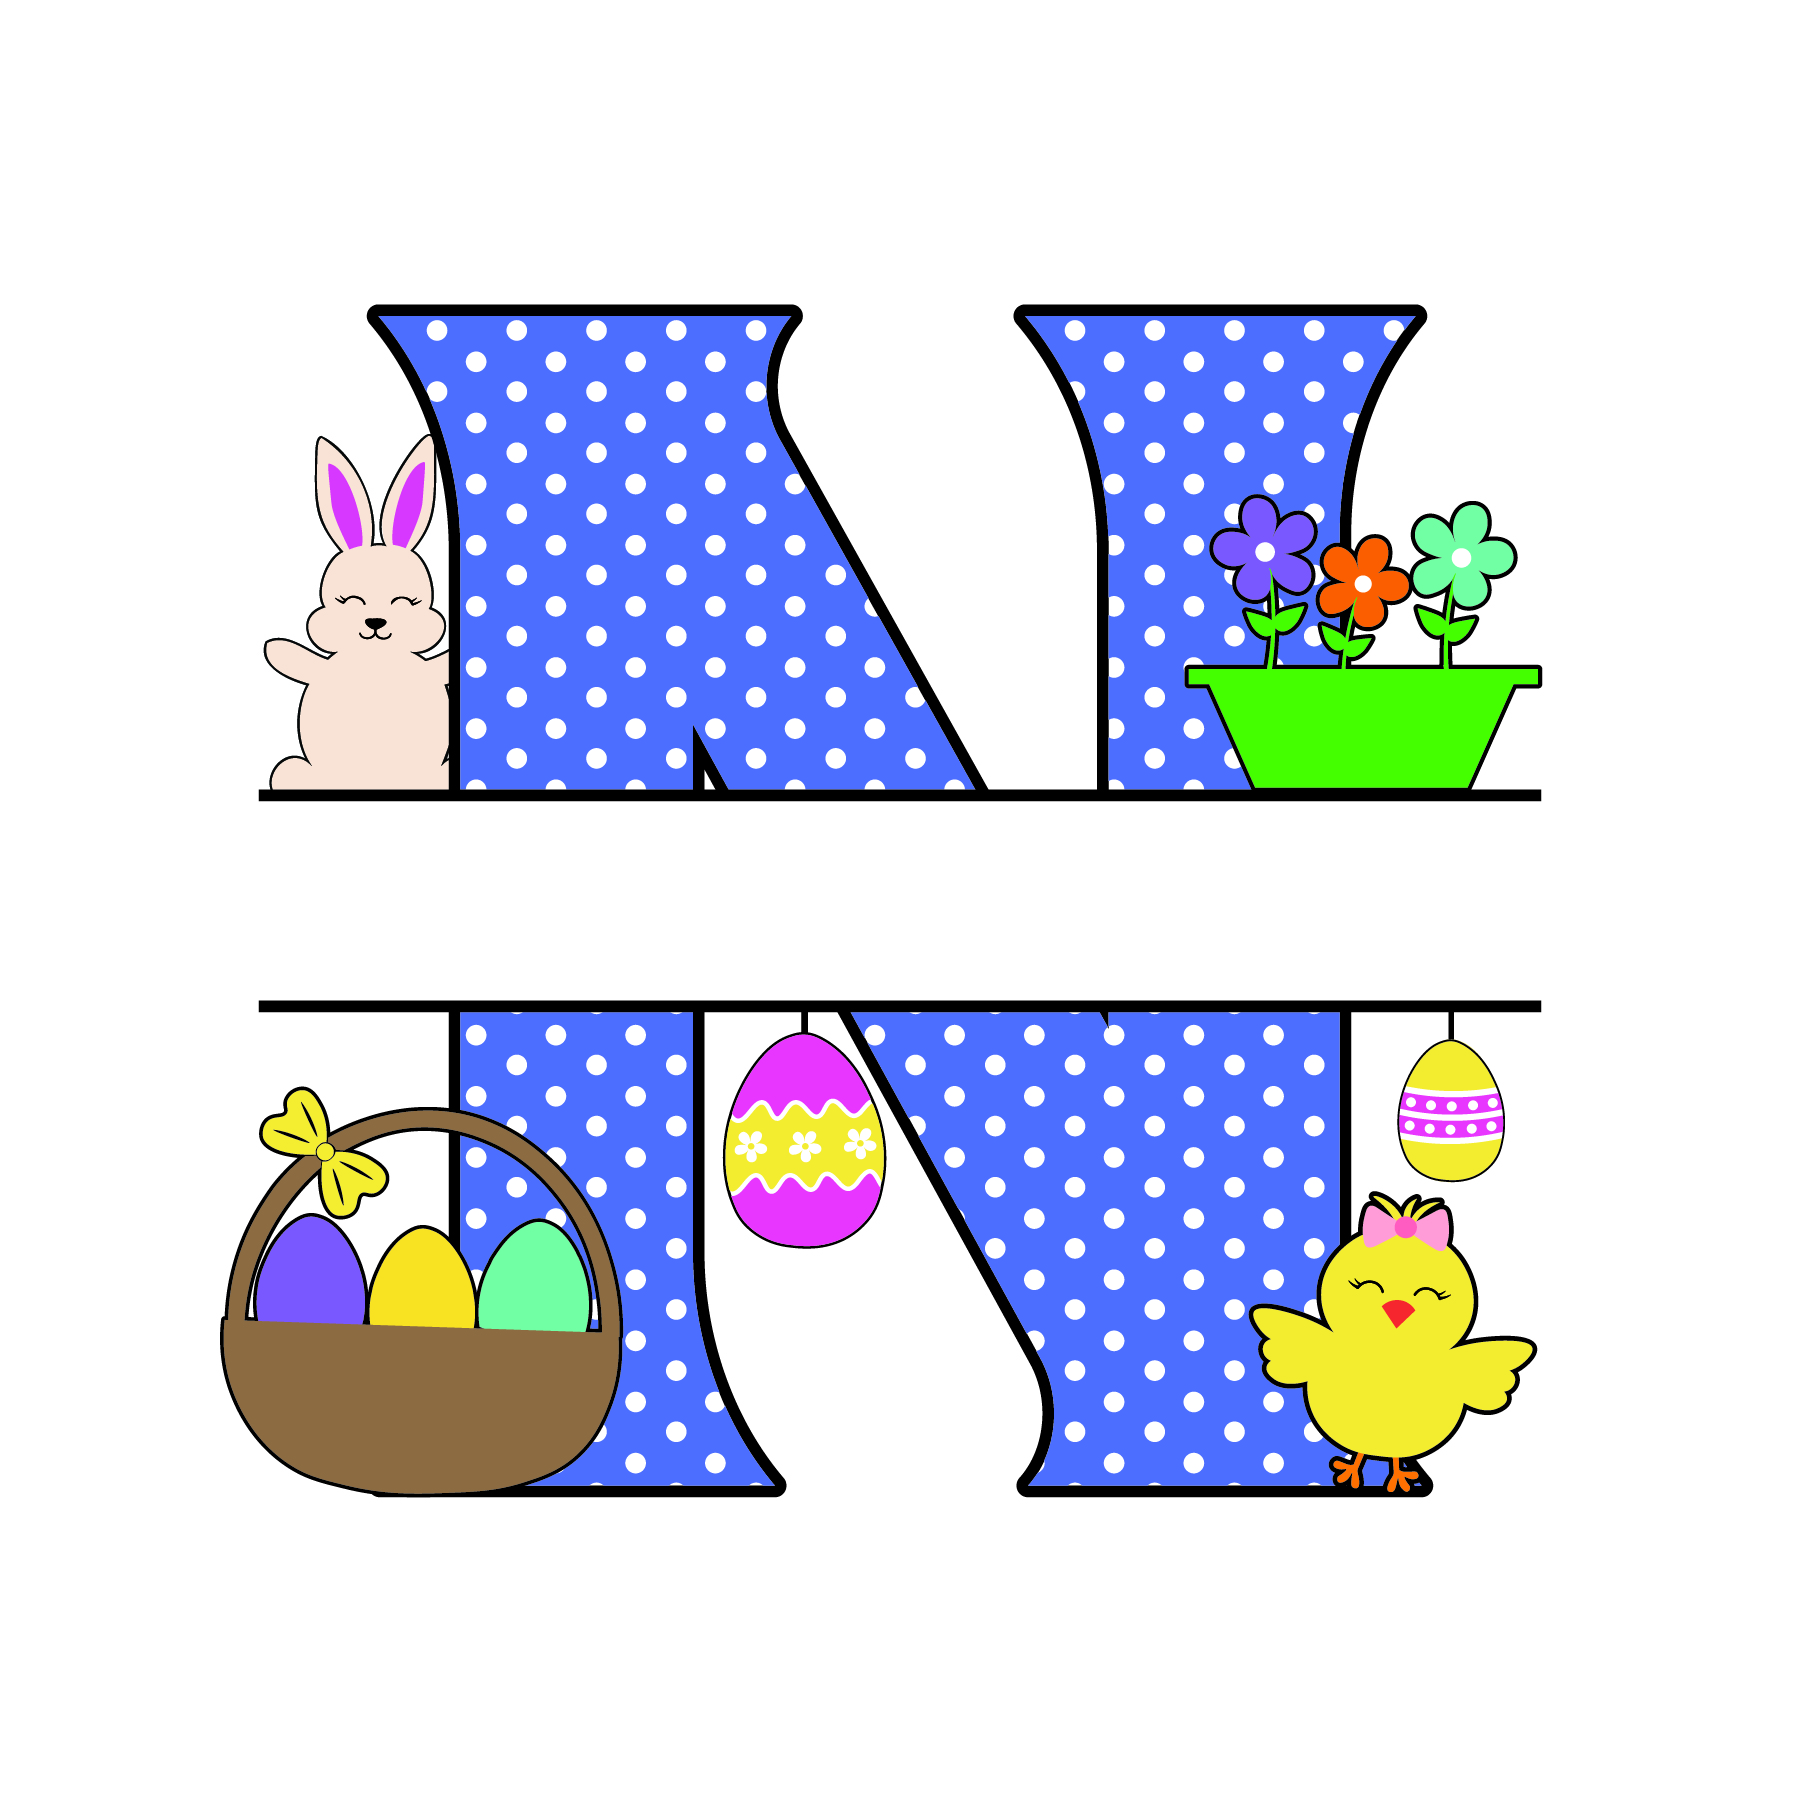 n letter free easter monogram bunny egg basket chicken clipart alphabet letter split customize or personalize stencil template to print or download vector svg laser vinyl circuit silhouette.